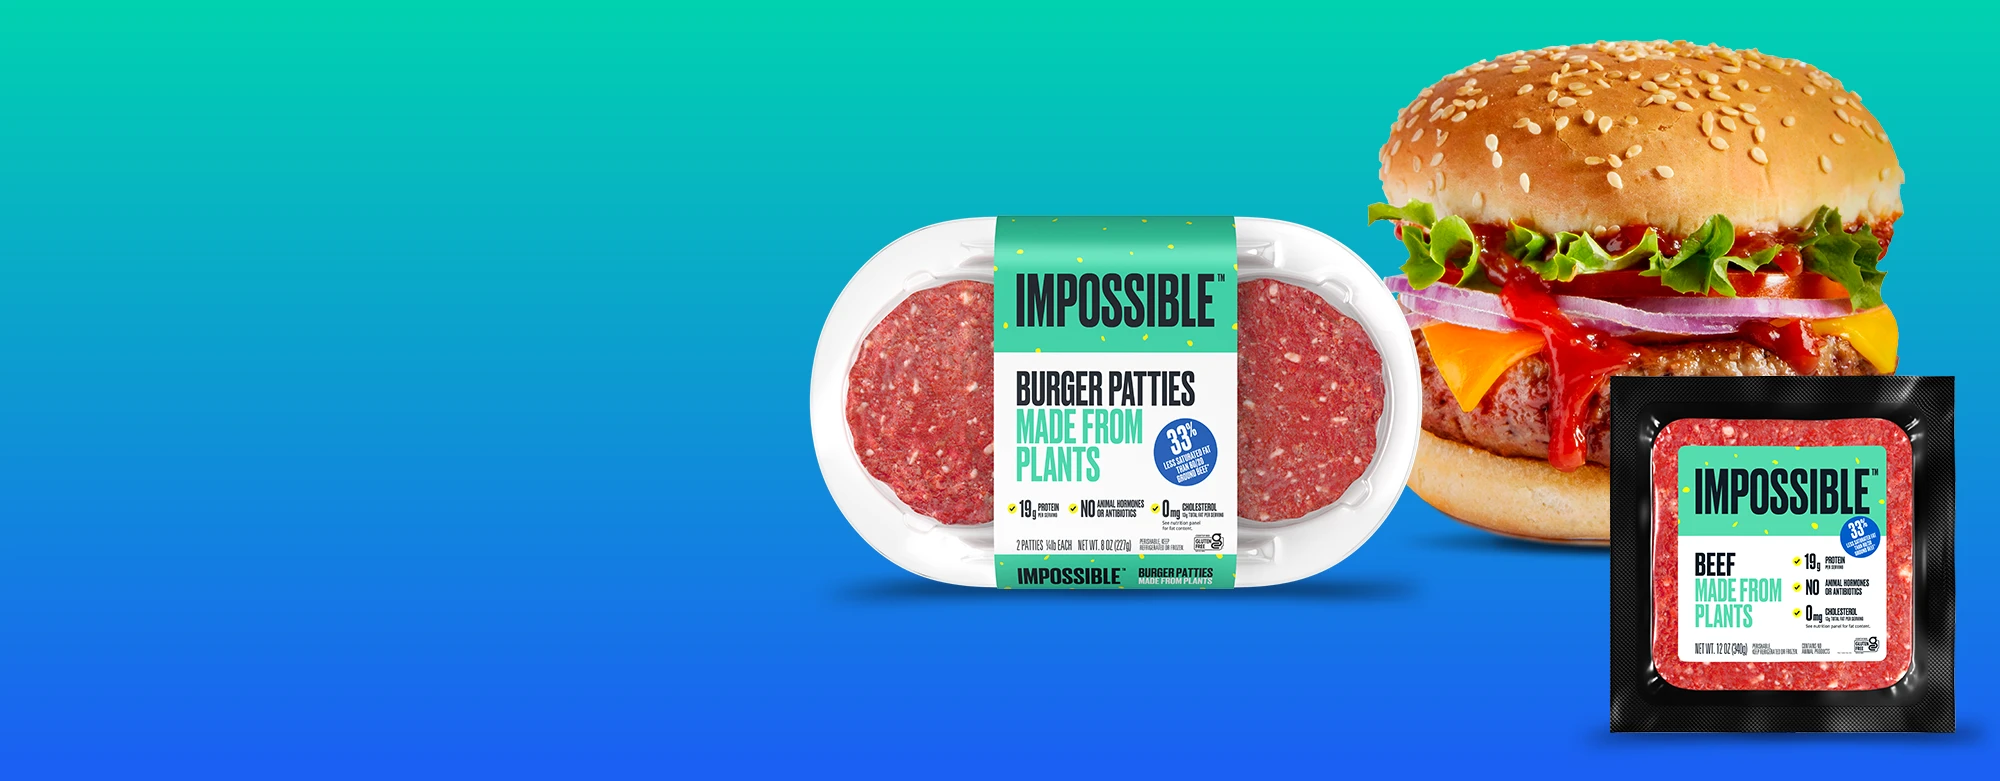 impossible beef 2 pack, impossible beef 12 oz pack and impossible burger with toppings in the the background on a blue and green banner background